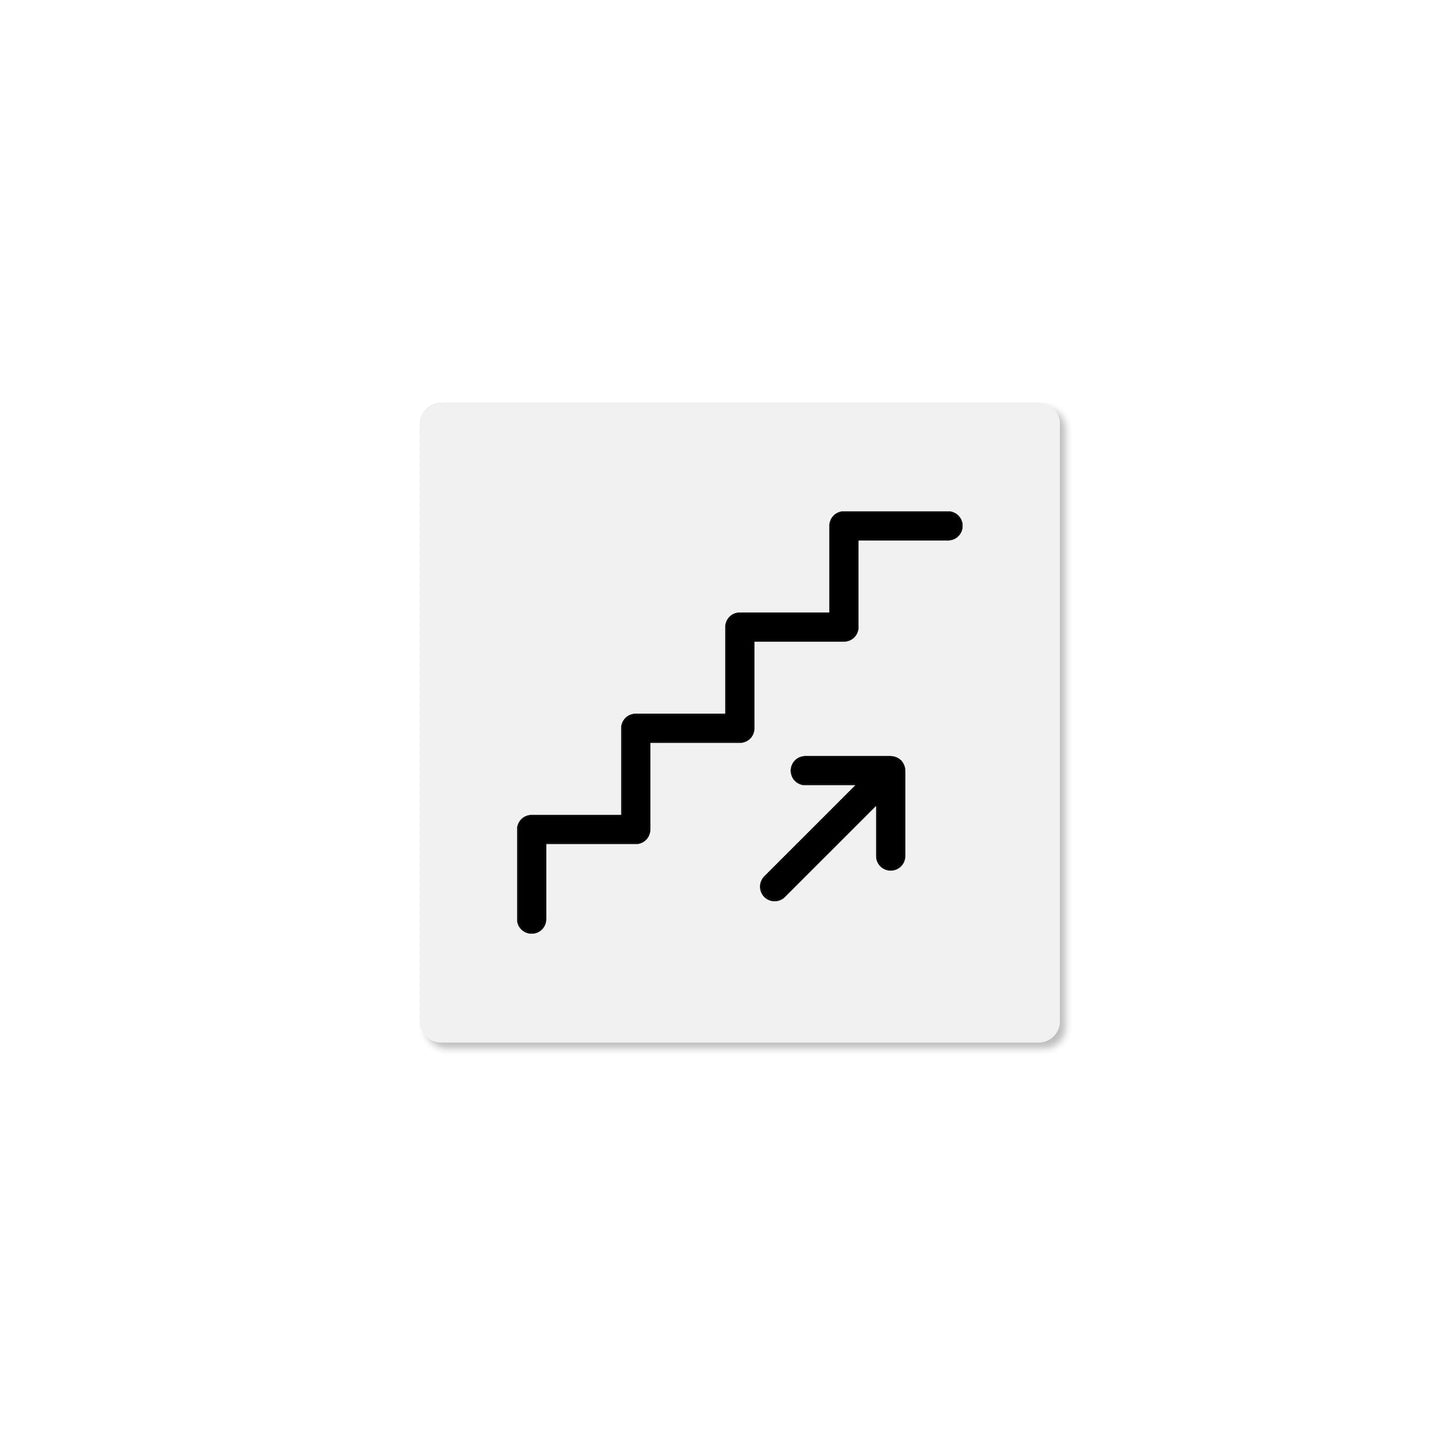 Up Stairs (Pictogram)